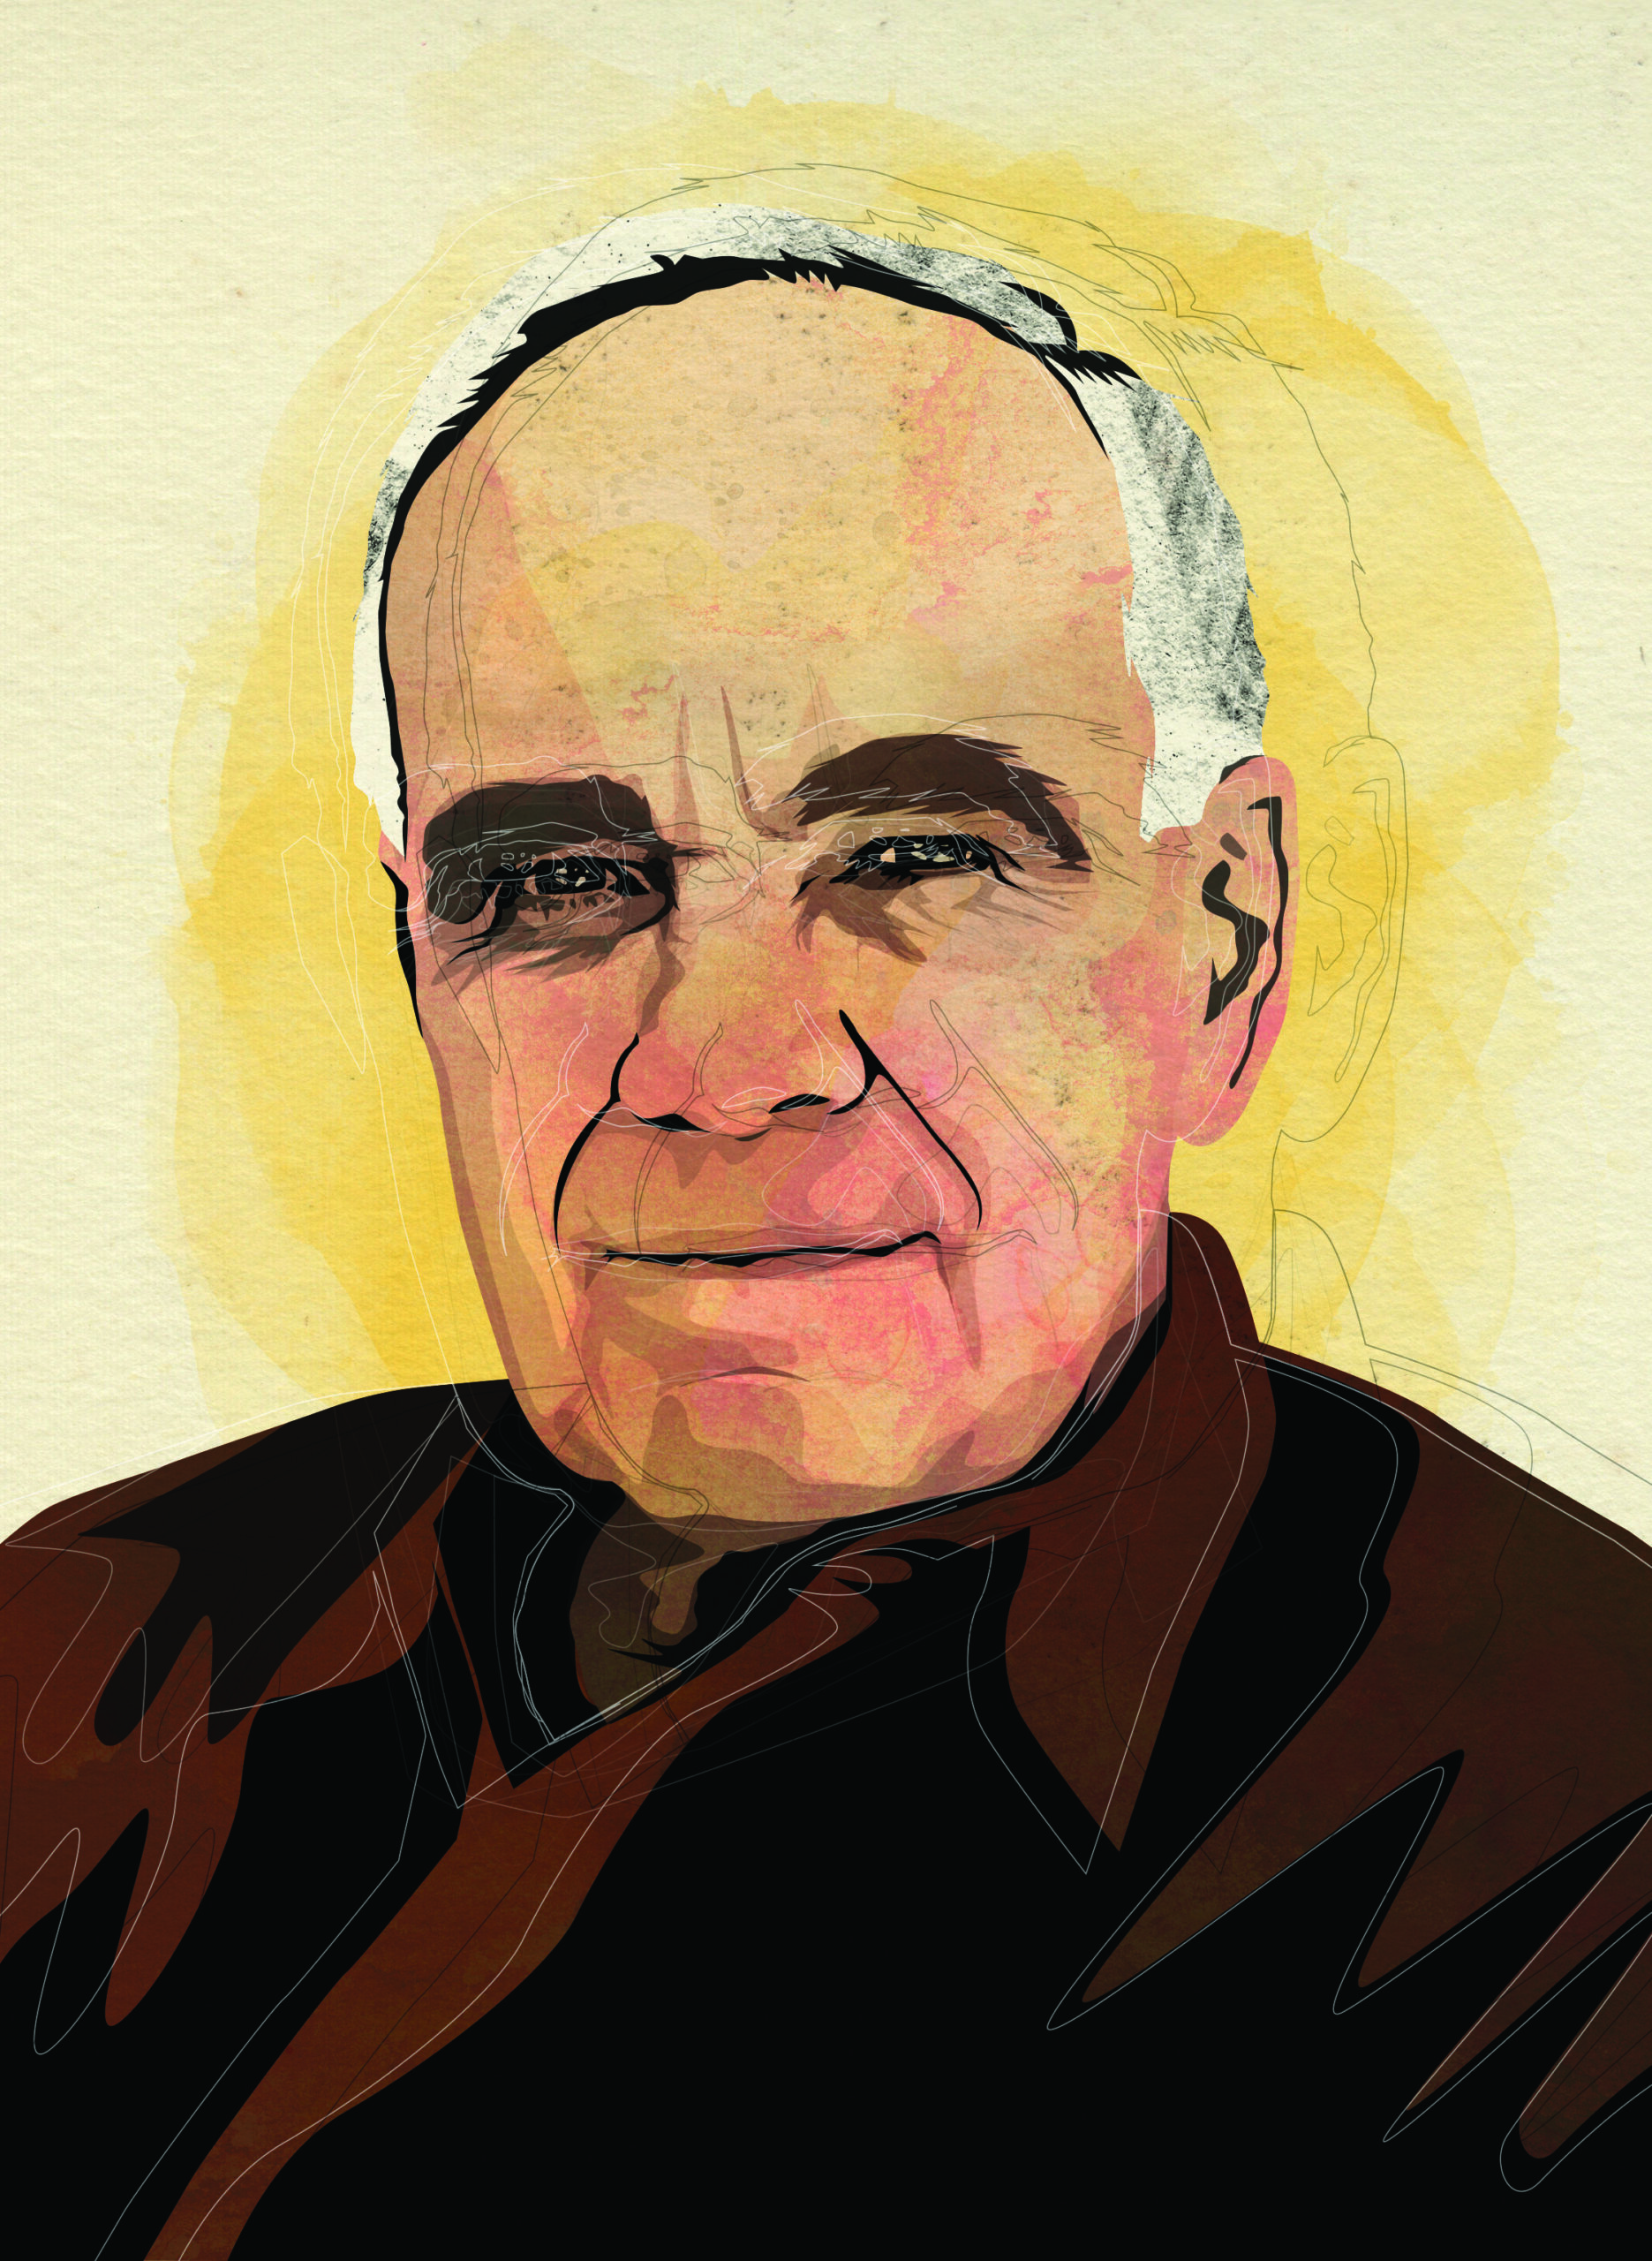 The Peacemaker | Notes on the Work of Cormac McCarthy